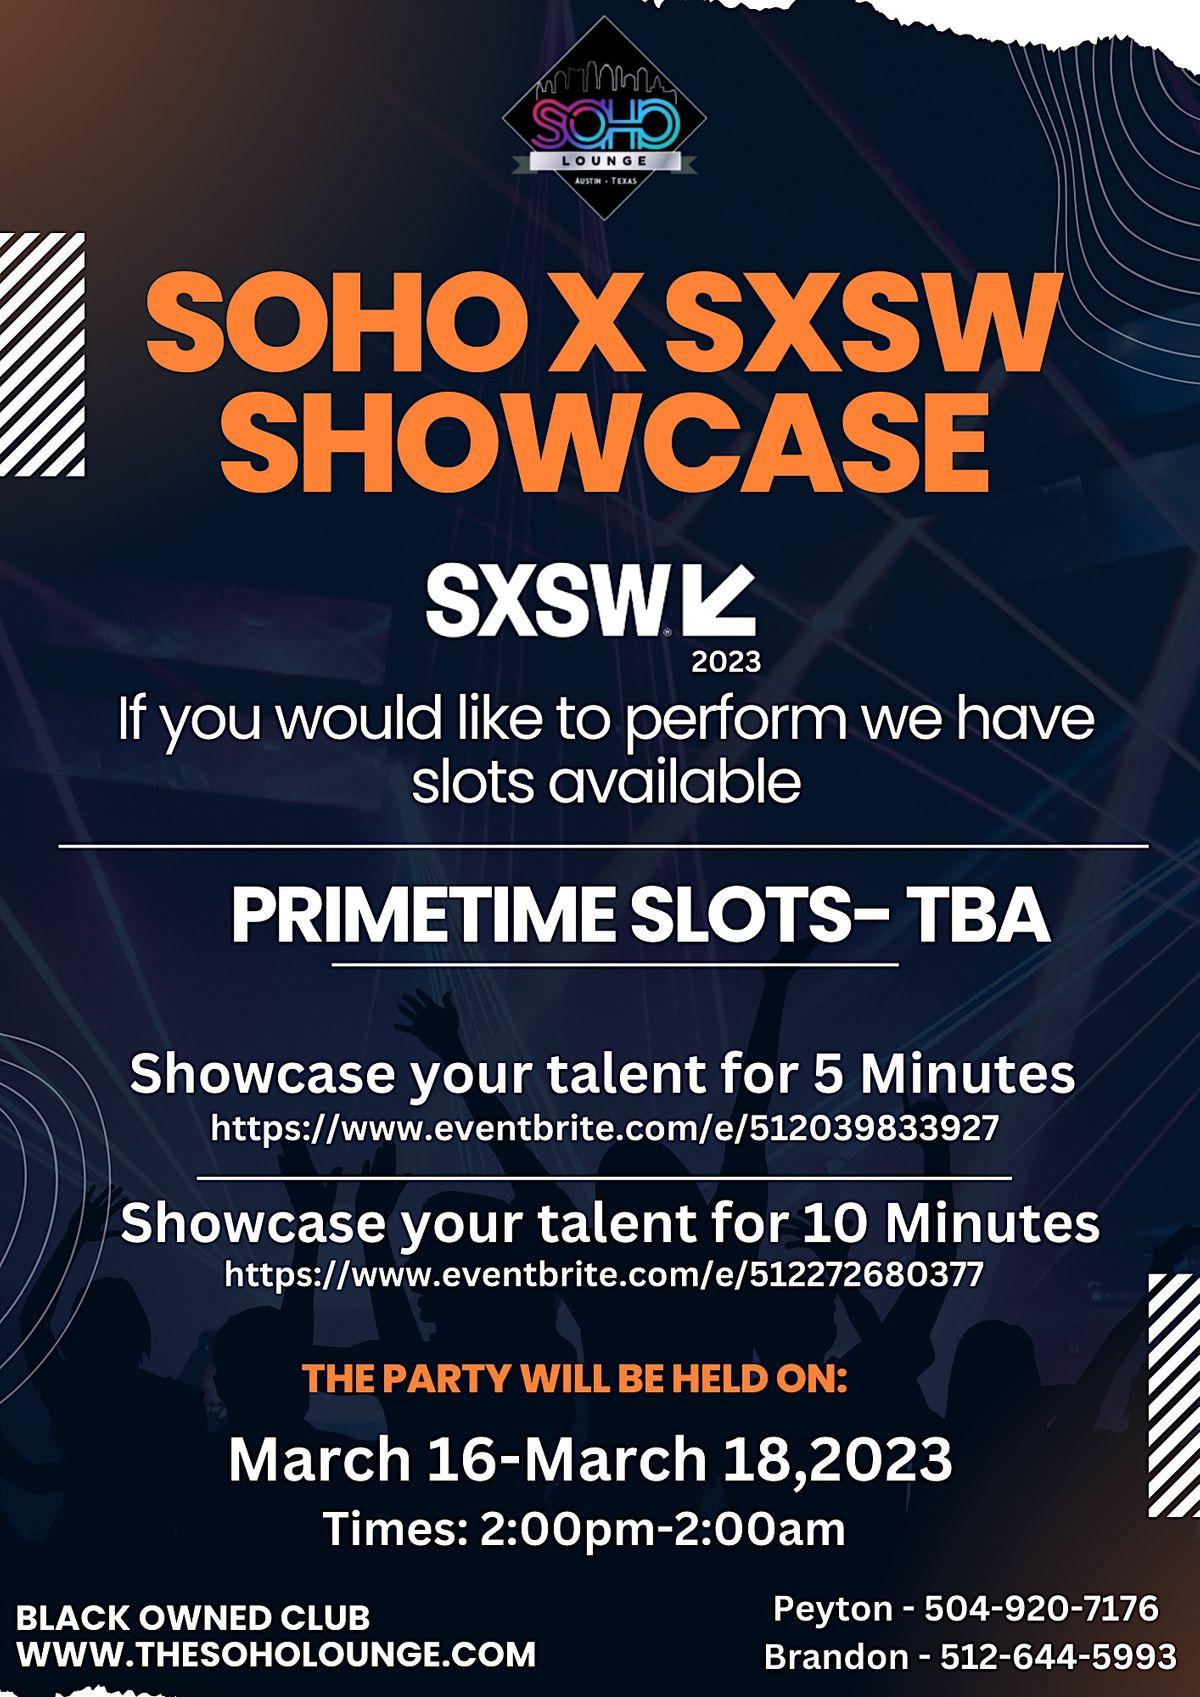 Showcase your talent for 5 Minutes